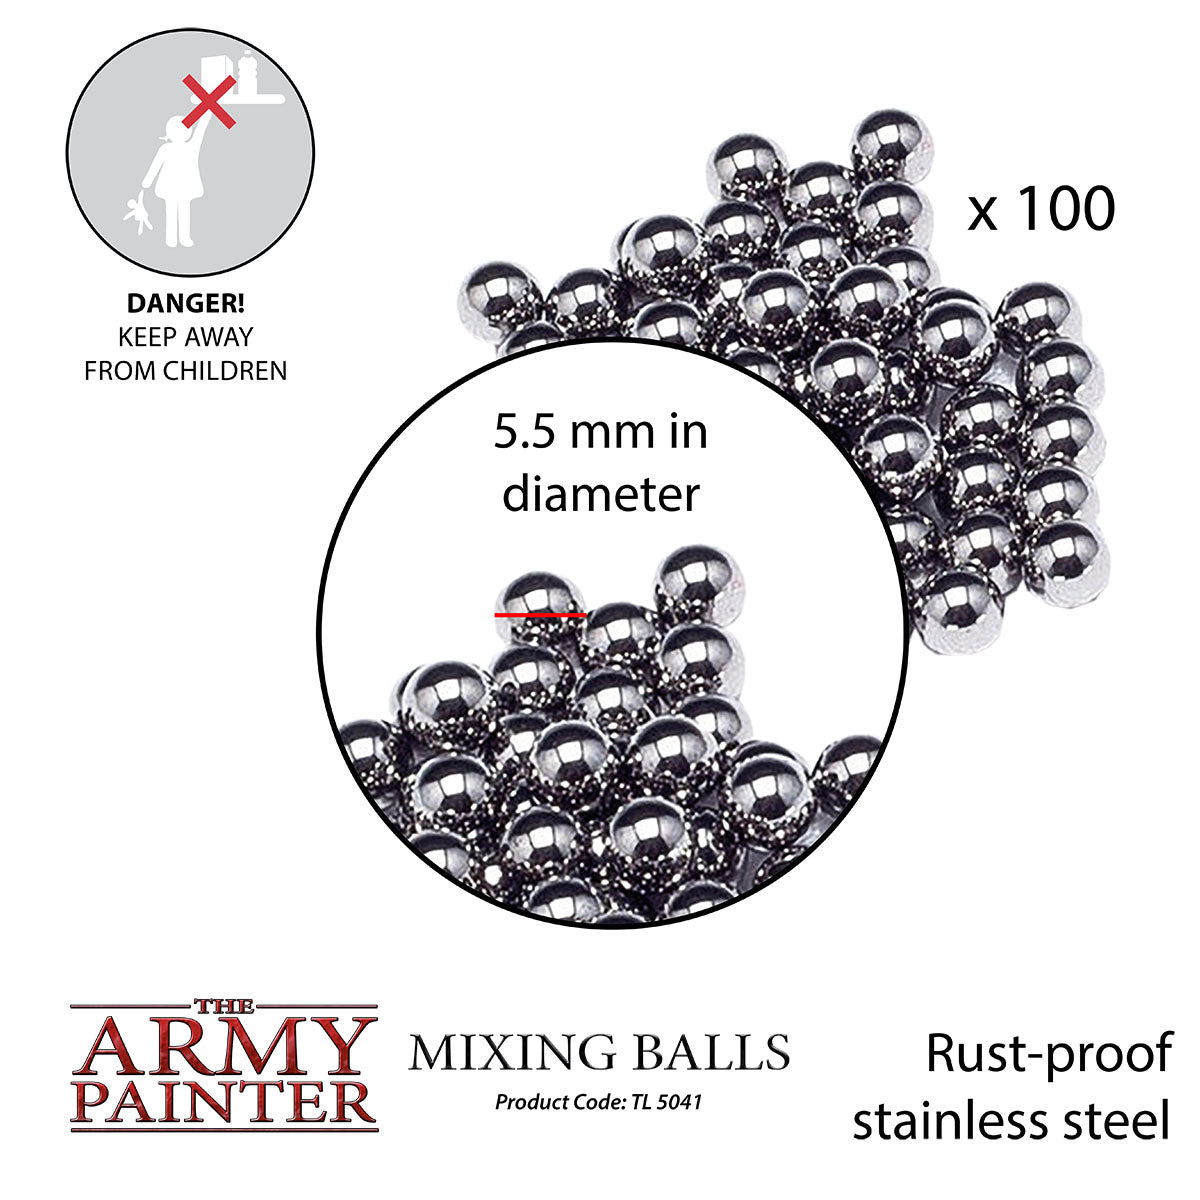 20ml Mini Paint Jars (x6) with Stainless Mixing Balls